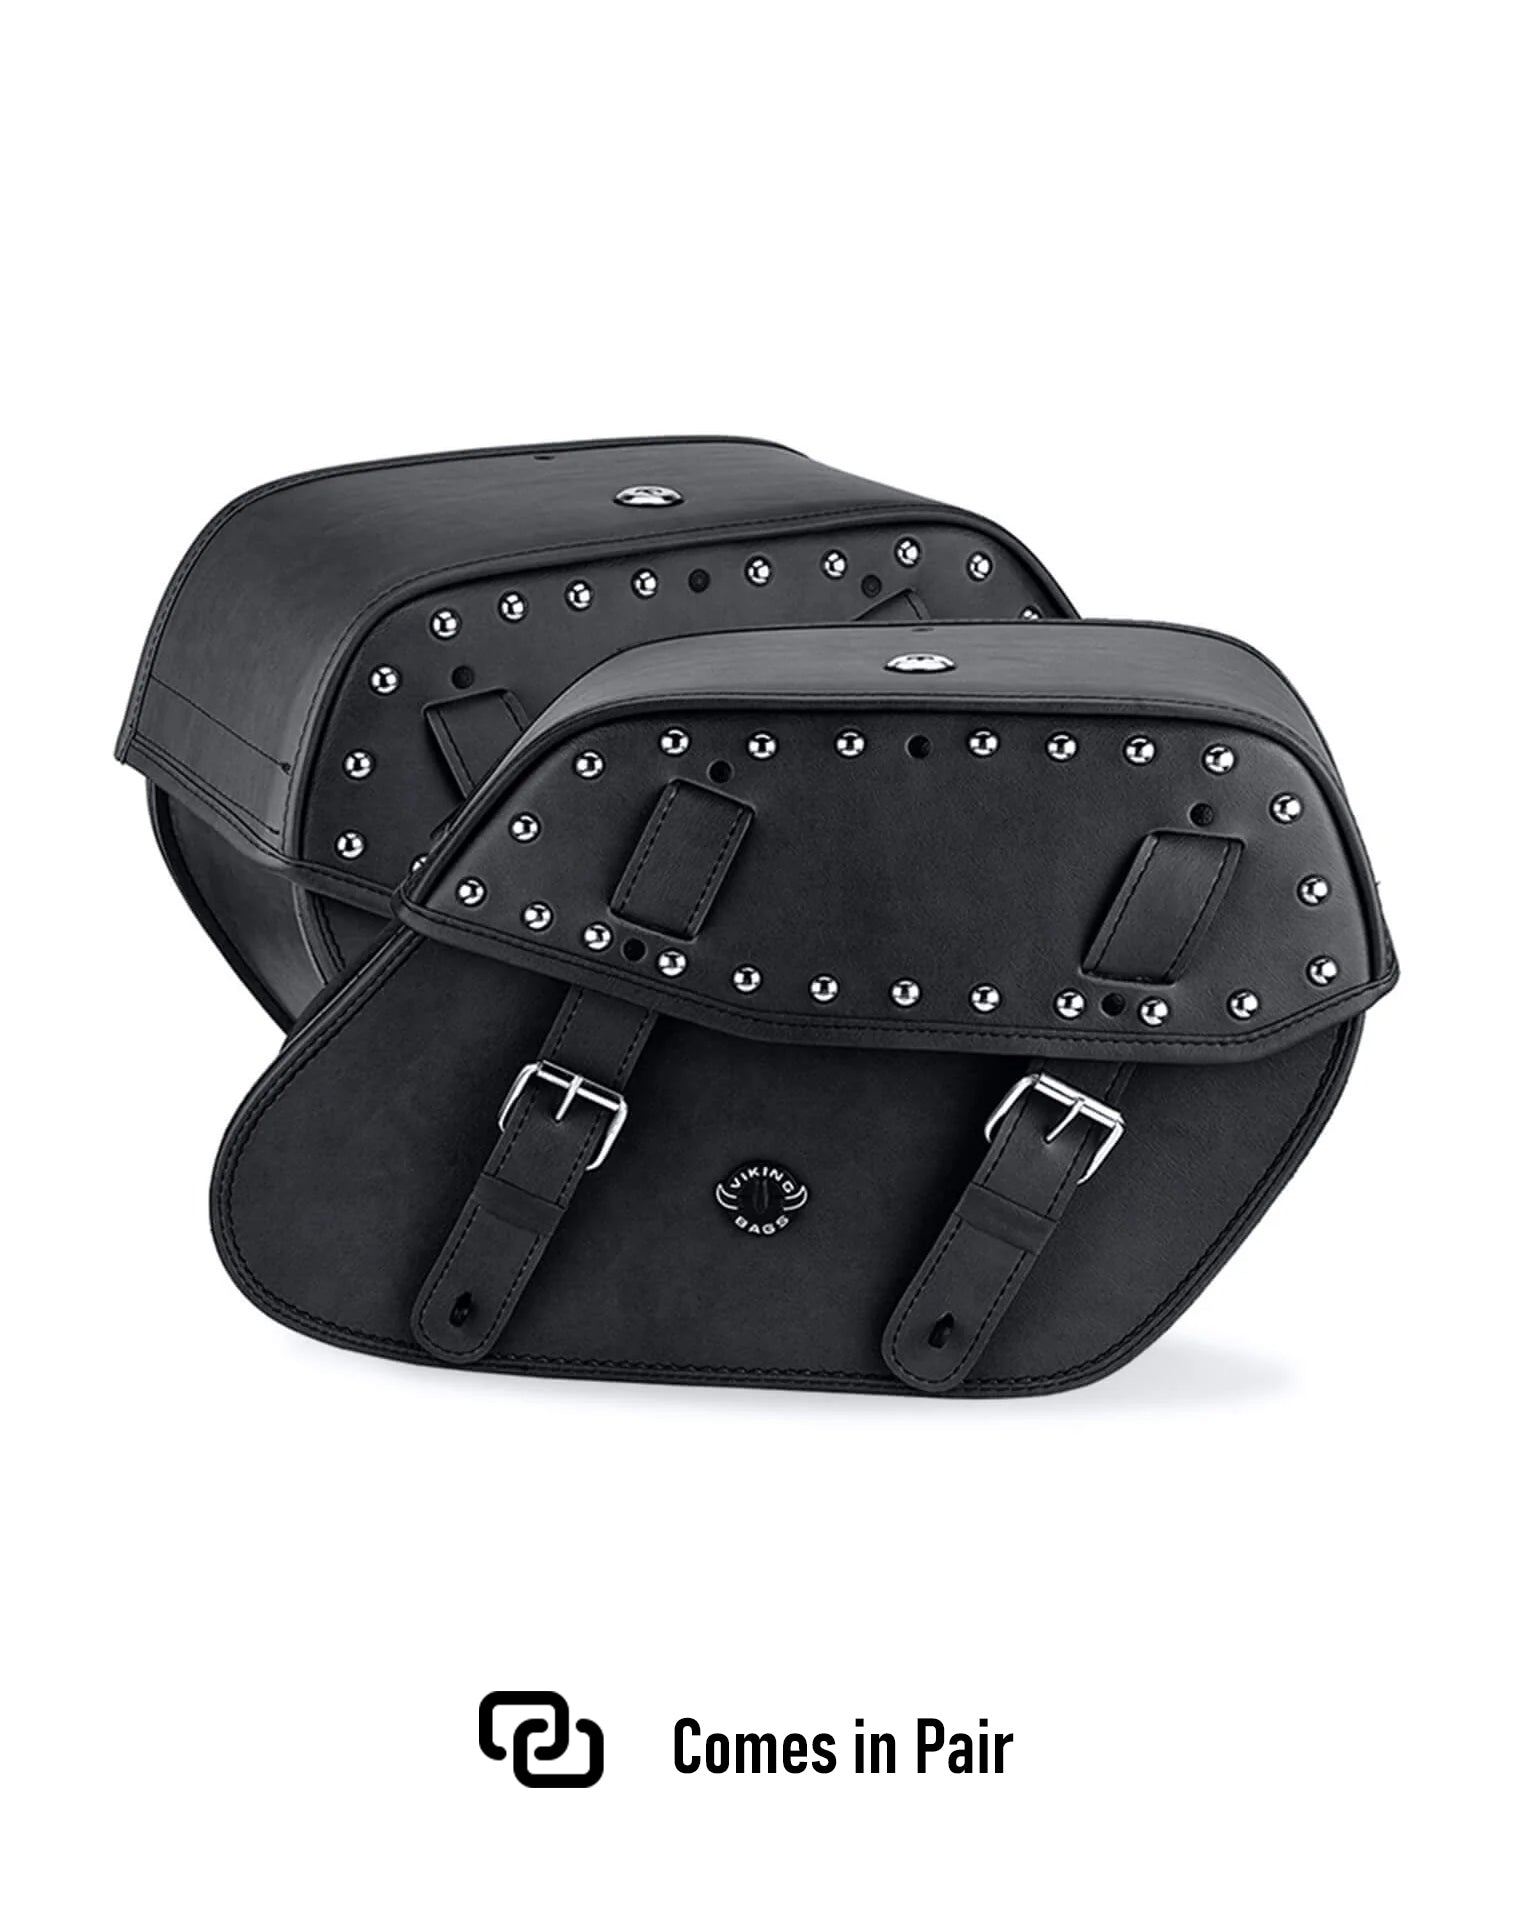 Viking Odin Large Triumph Rocket Iii Touring Studded Leather Motorcycle Saddlebags Weather Resistant Bags Comes in Pair